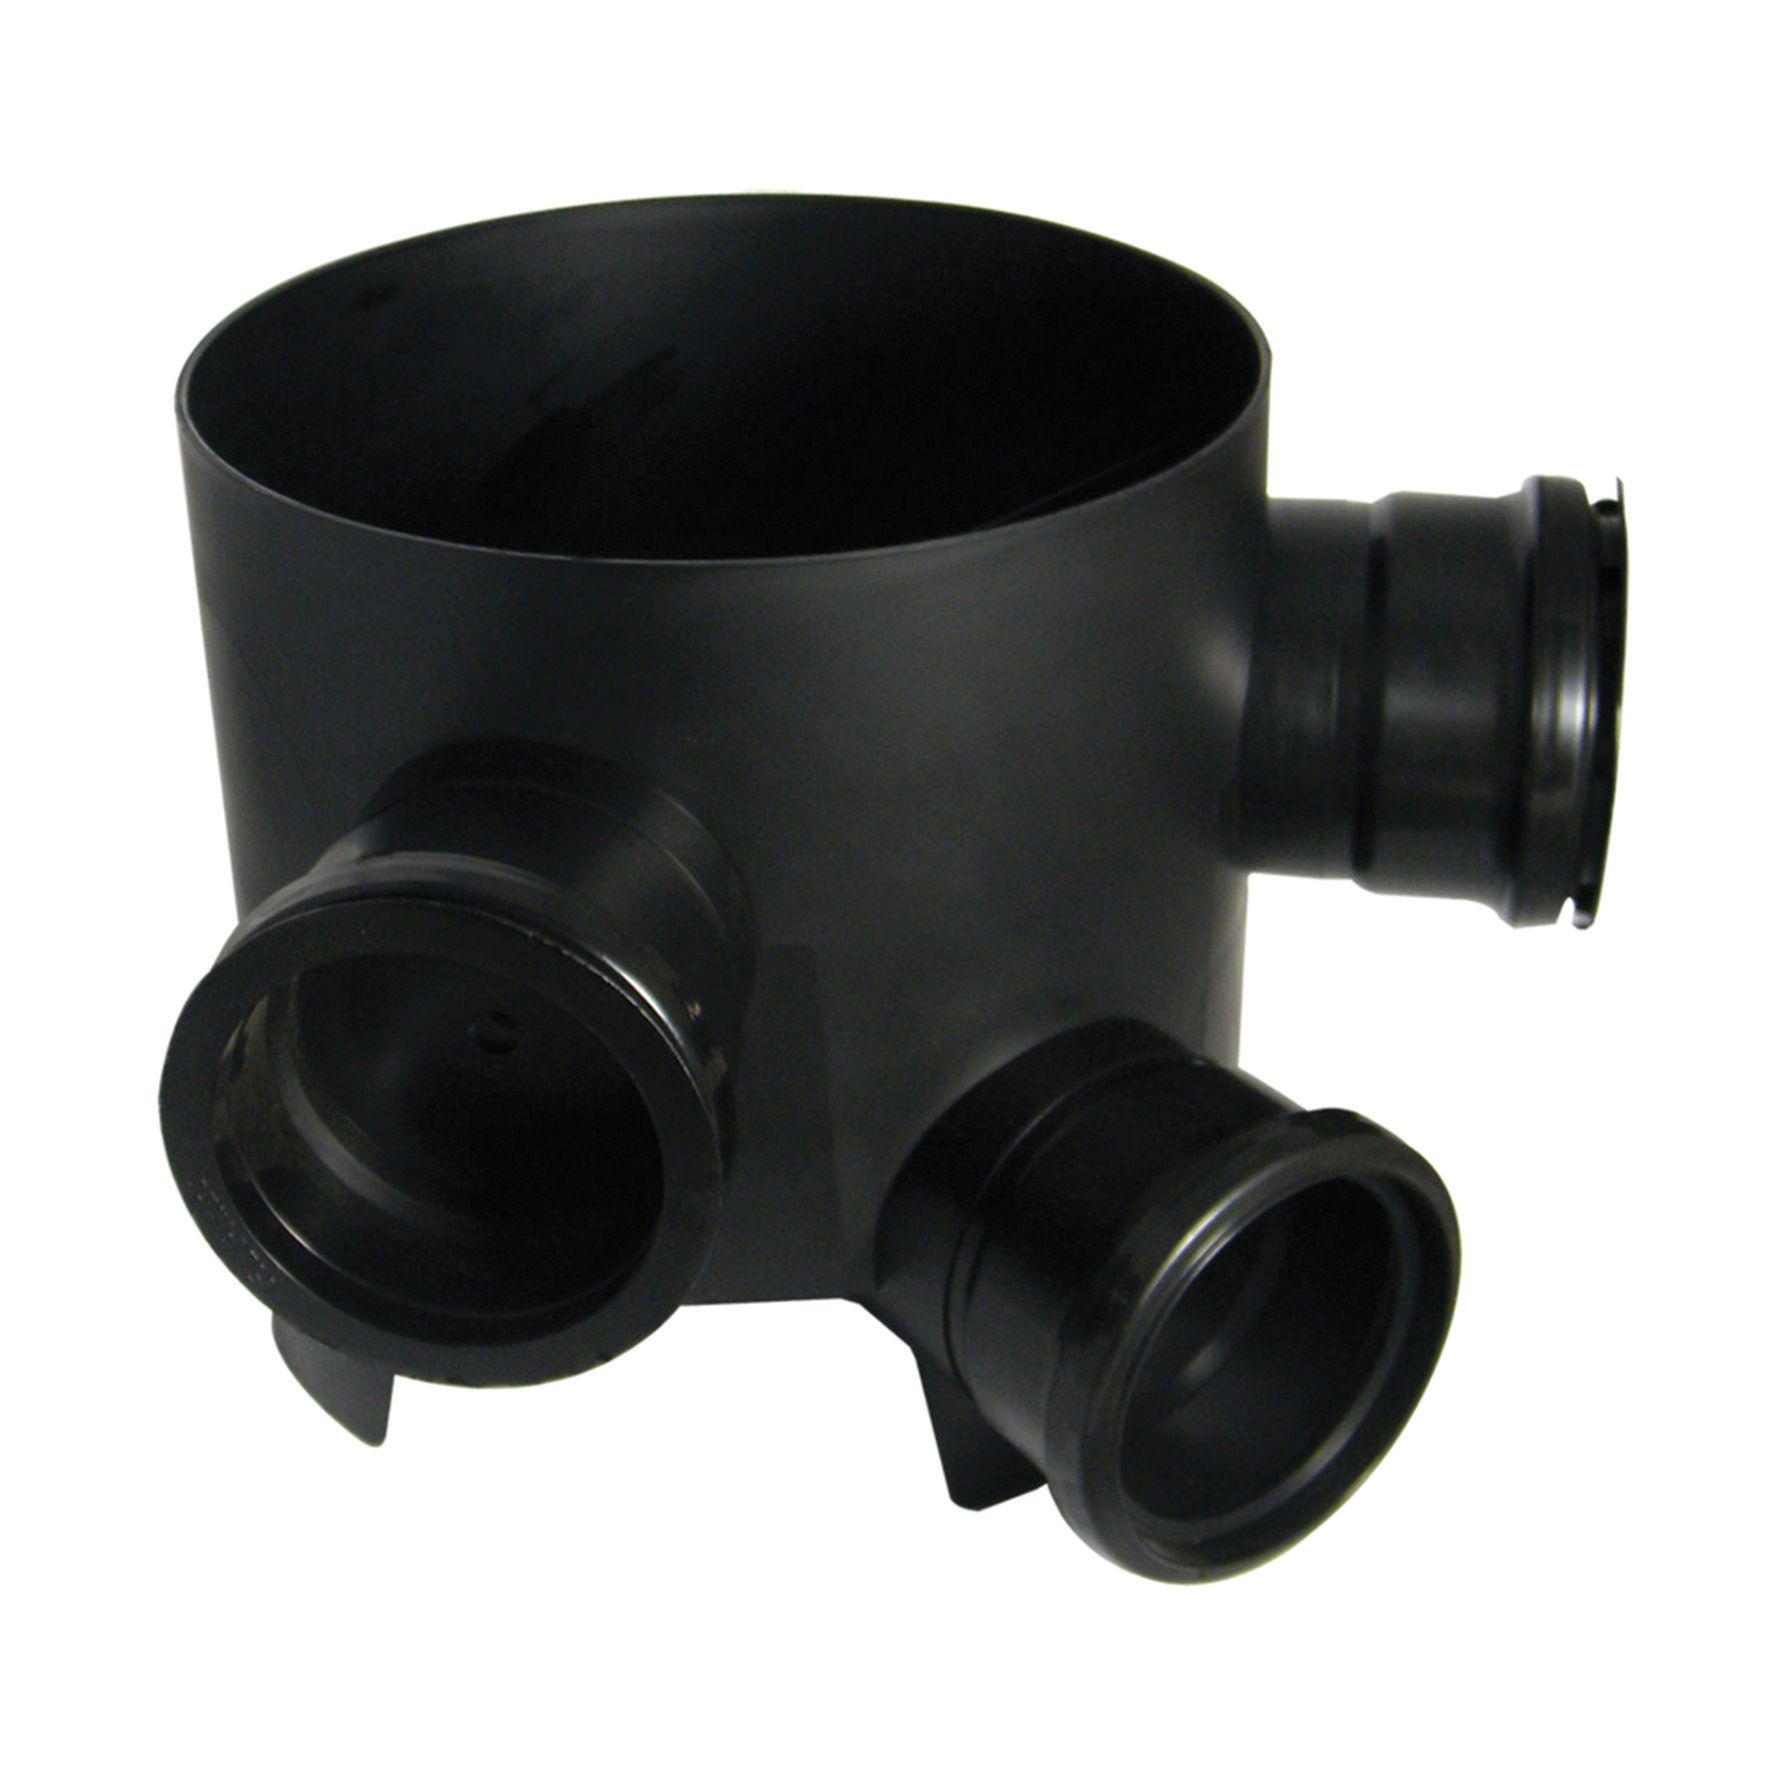 Image of FloPlast 300mm Mini Access Chamber Base with 3 Fixed Inlets - Black